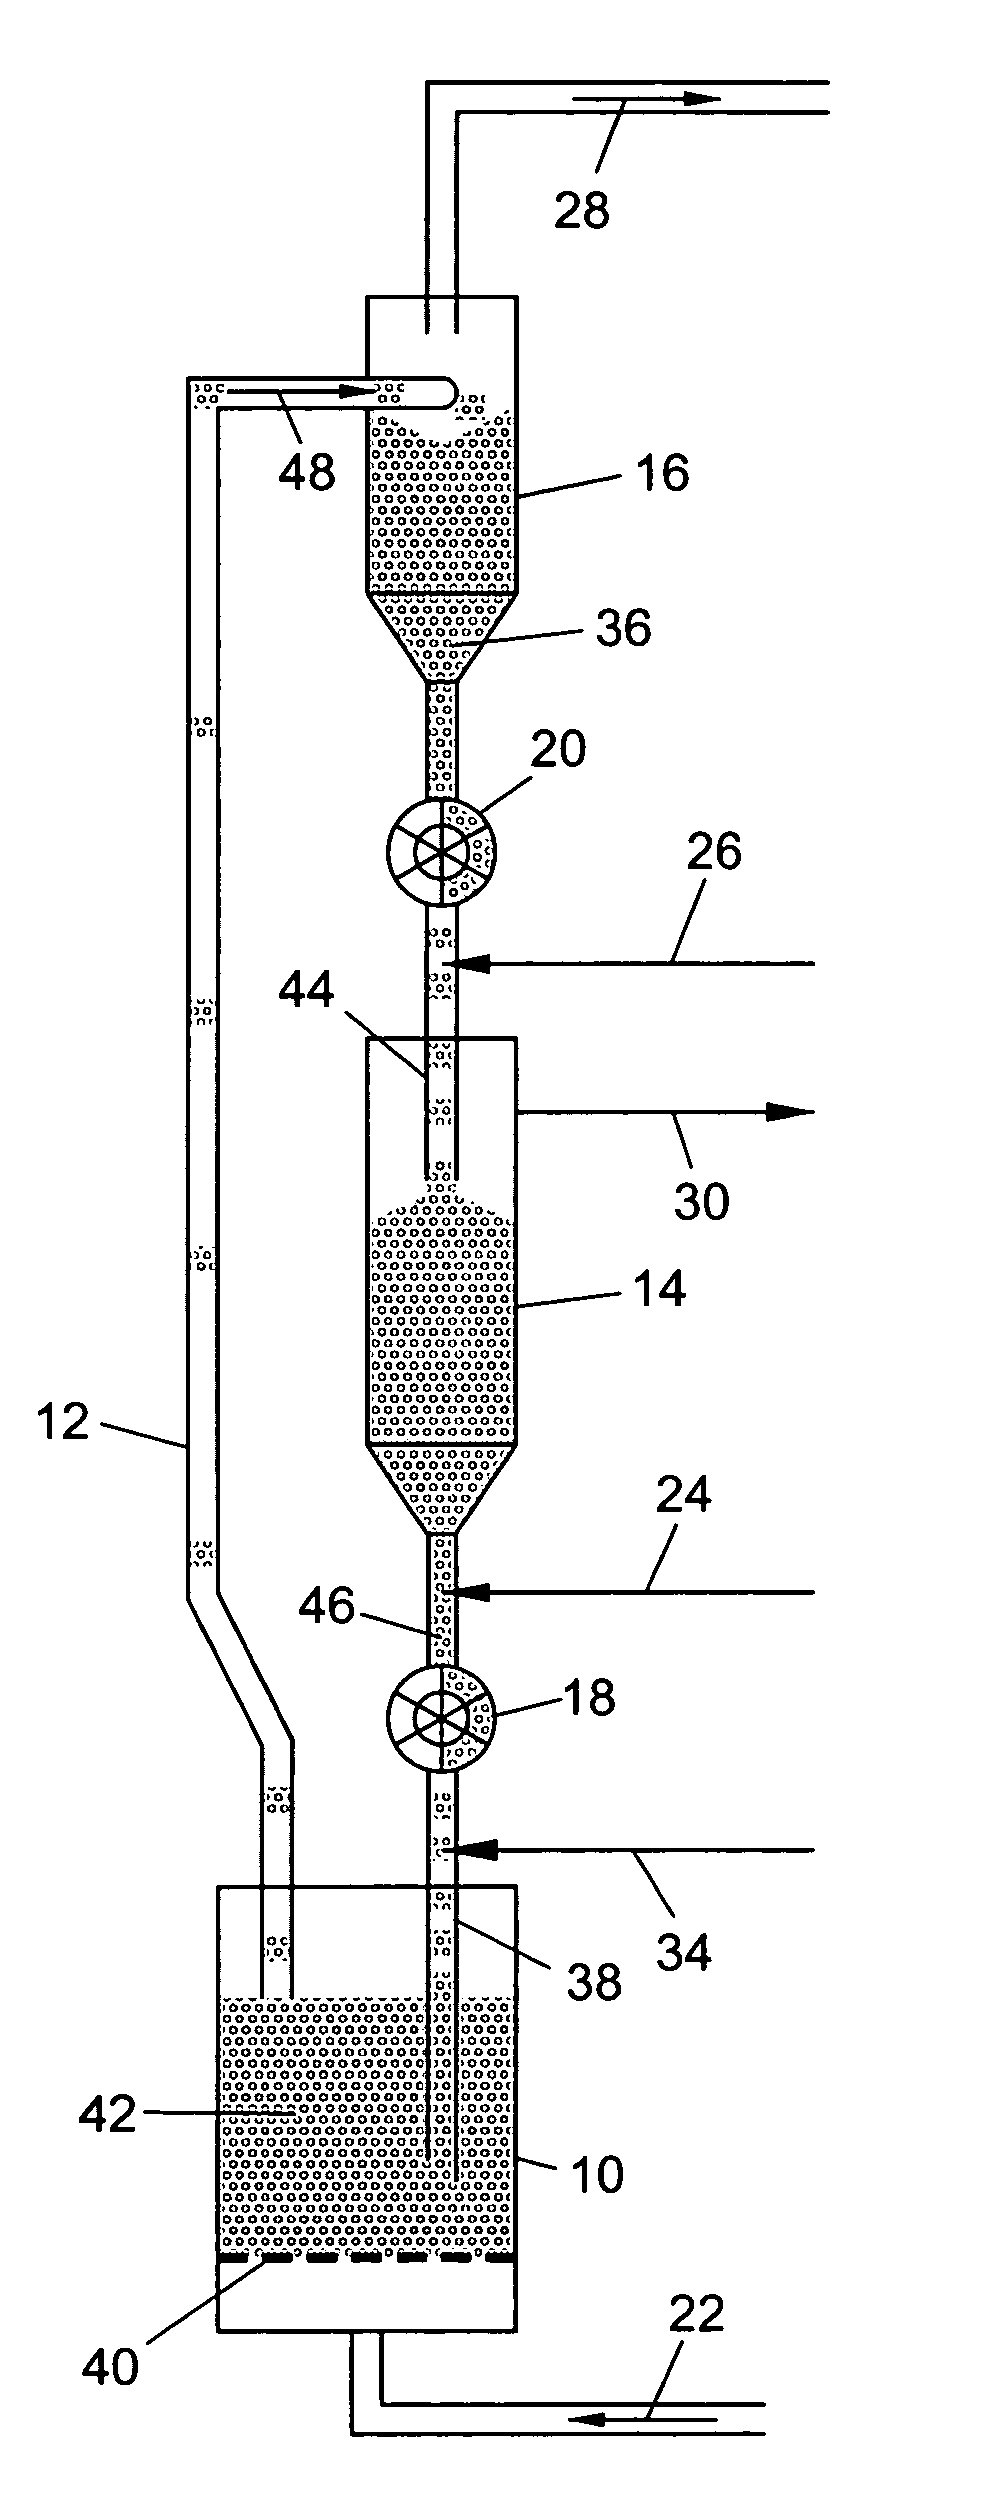 Method for preferentially removing monovalent cations from contaminated water